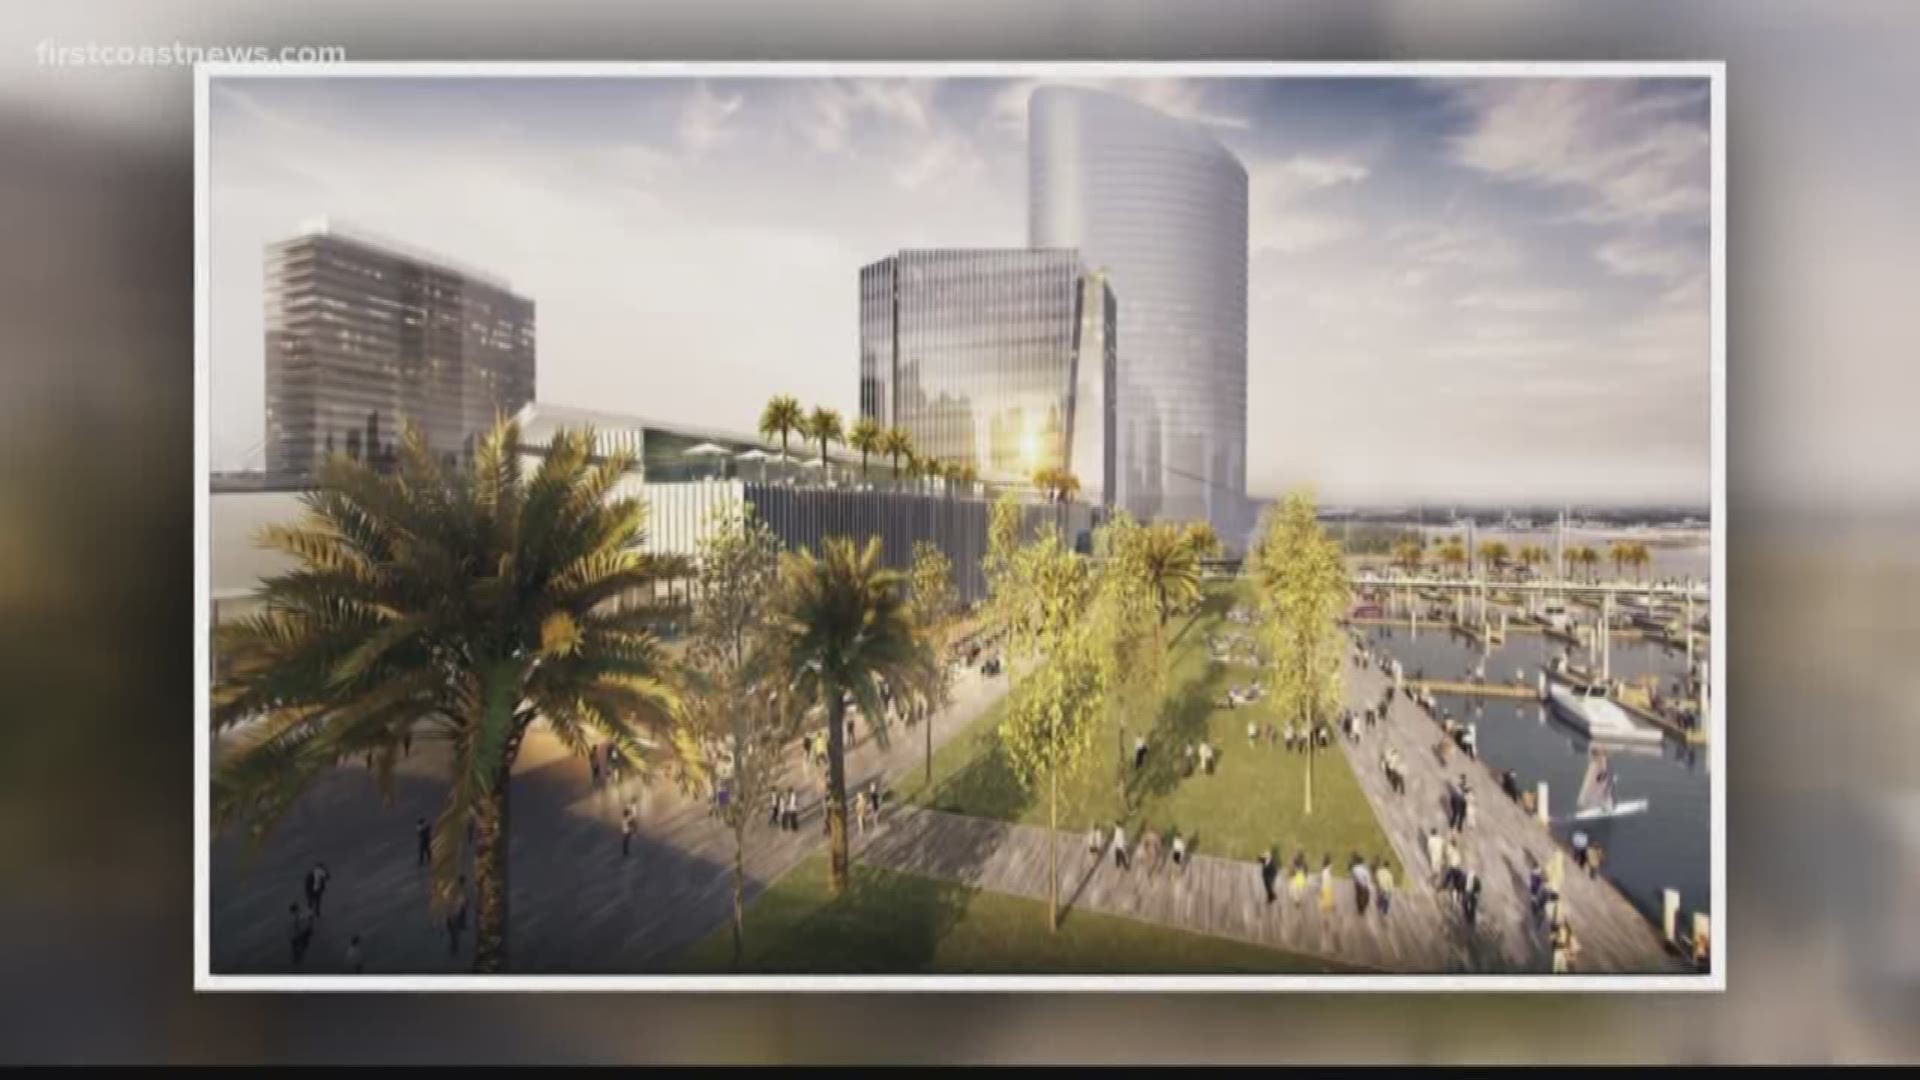 Mayor Curry believes the project will strengthen Jacksonville's downtown and will position Jacksonville to be the host of "world-class" events in the future.